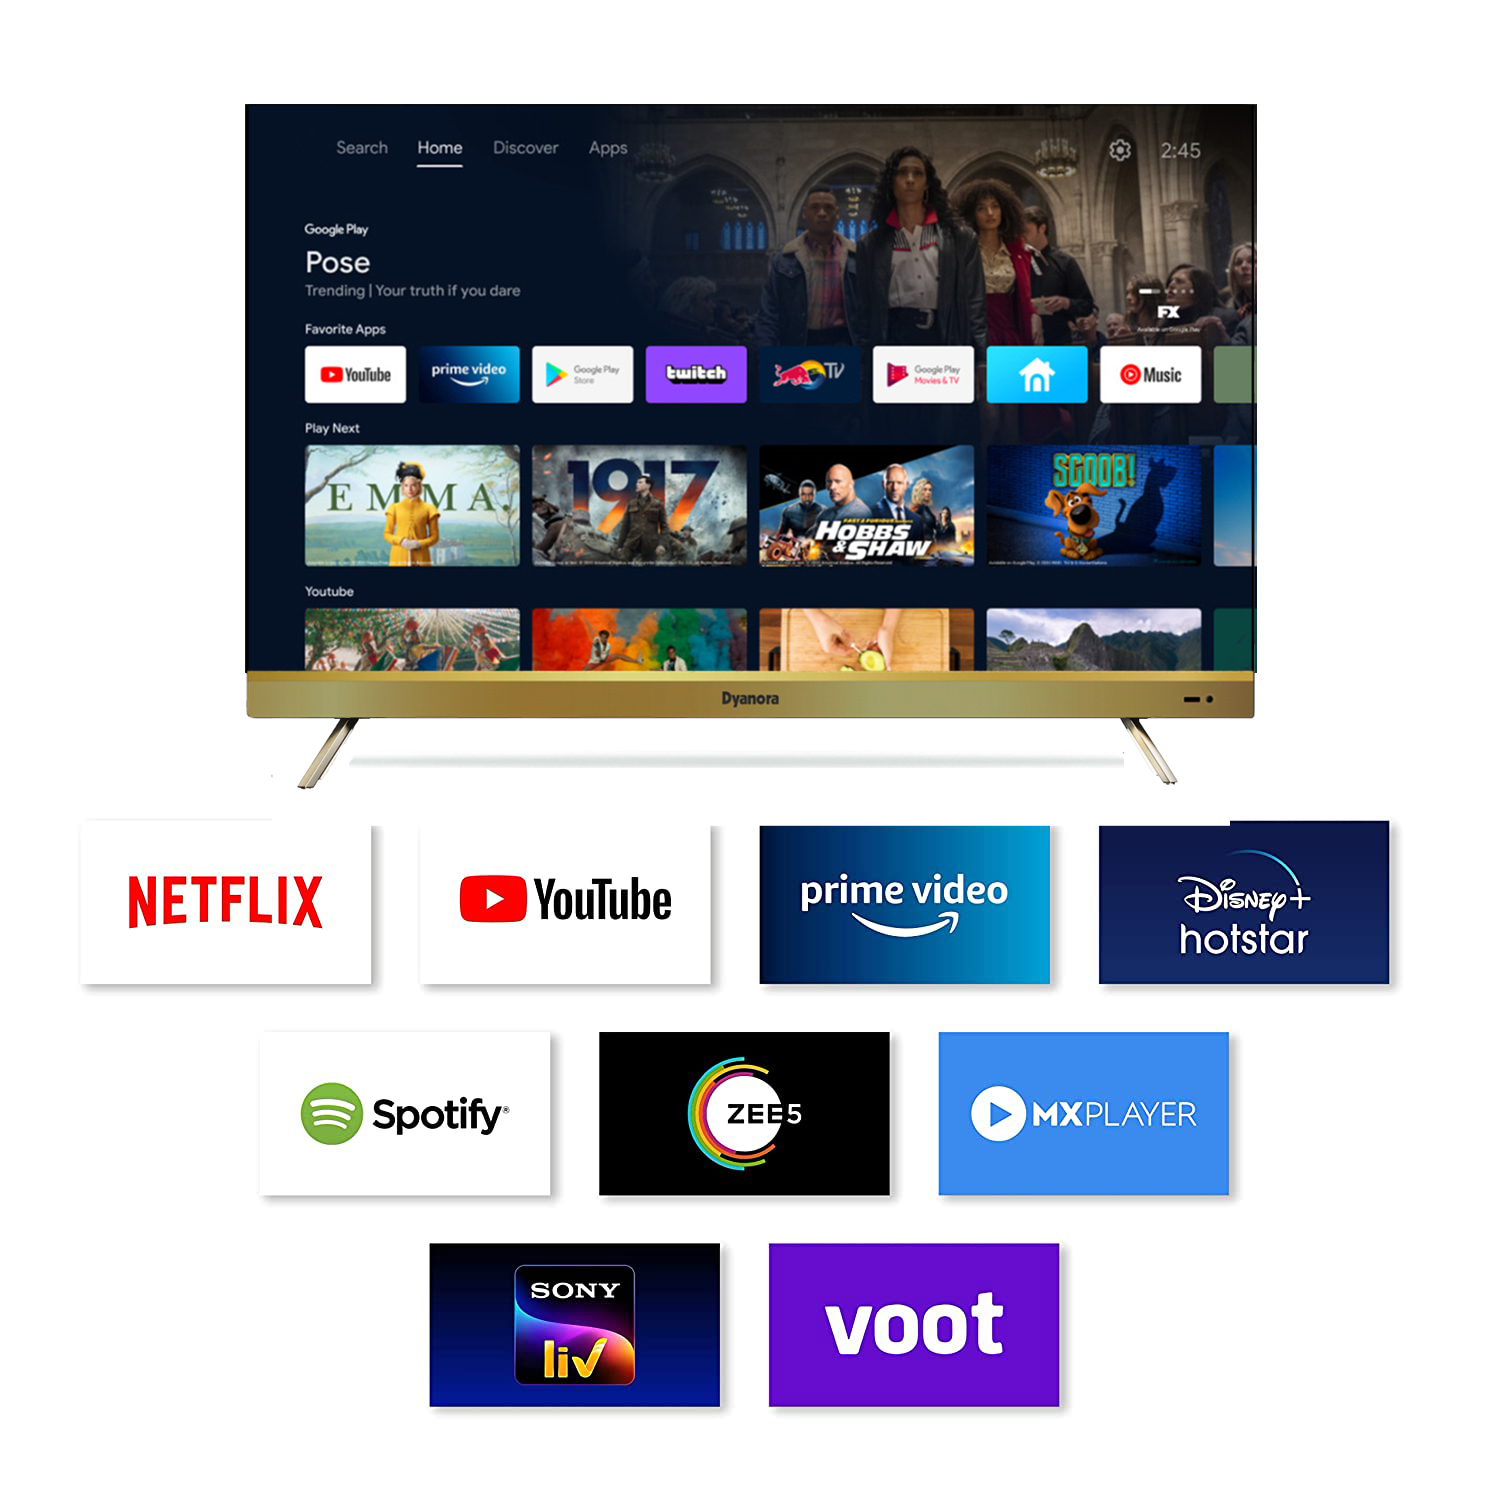 Dyanora 109 cm (43 inches) Ultra HD 4K LED Smart Android TV (DY-LD43U4S)